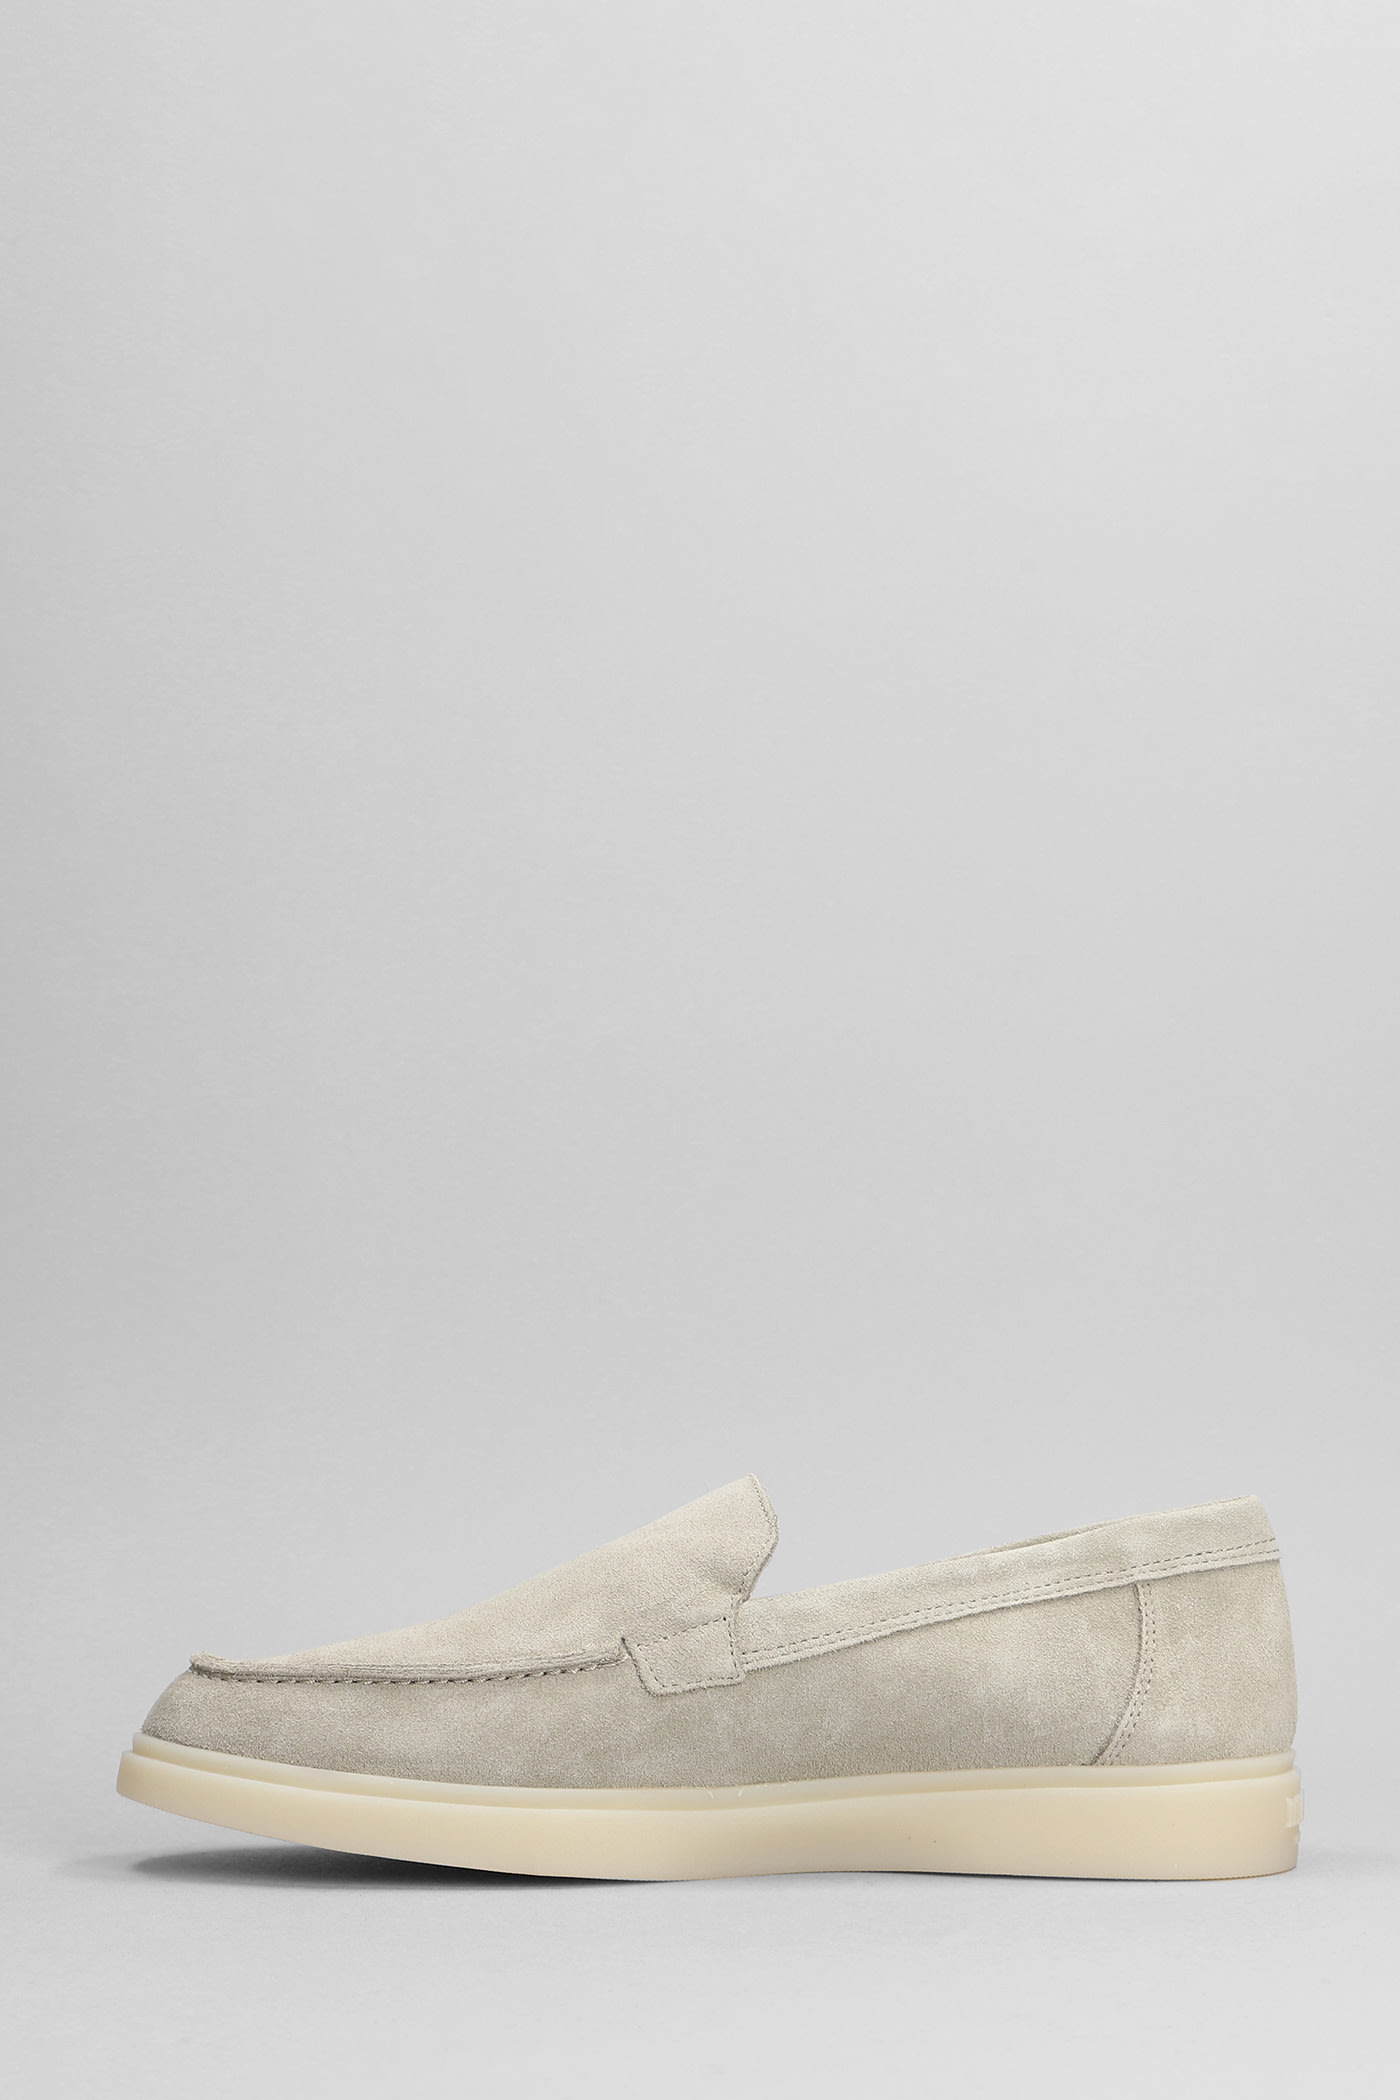 Shop Mason Garments Amalfi Loafers In Taupe Suede